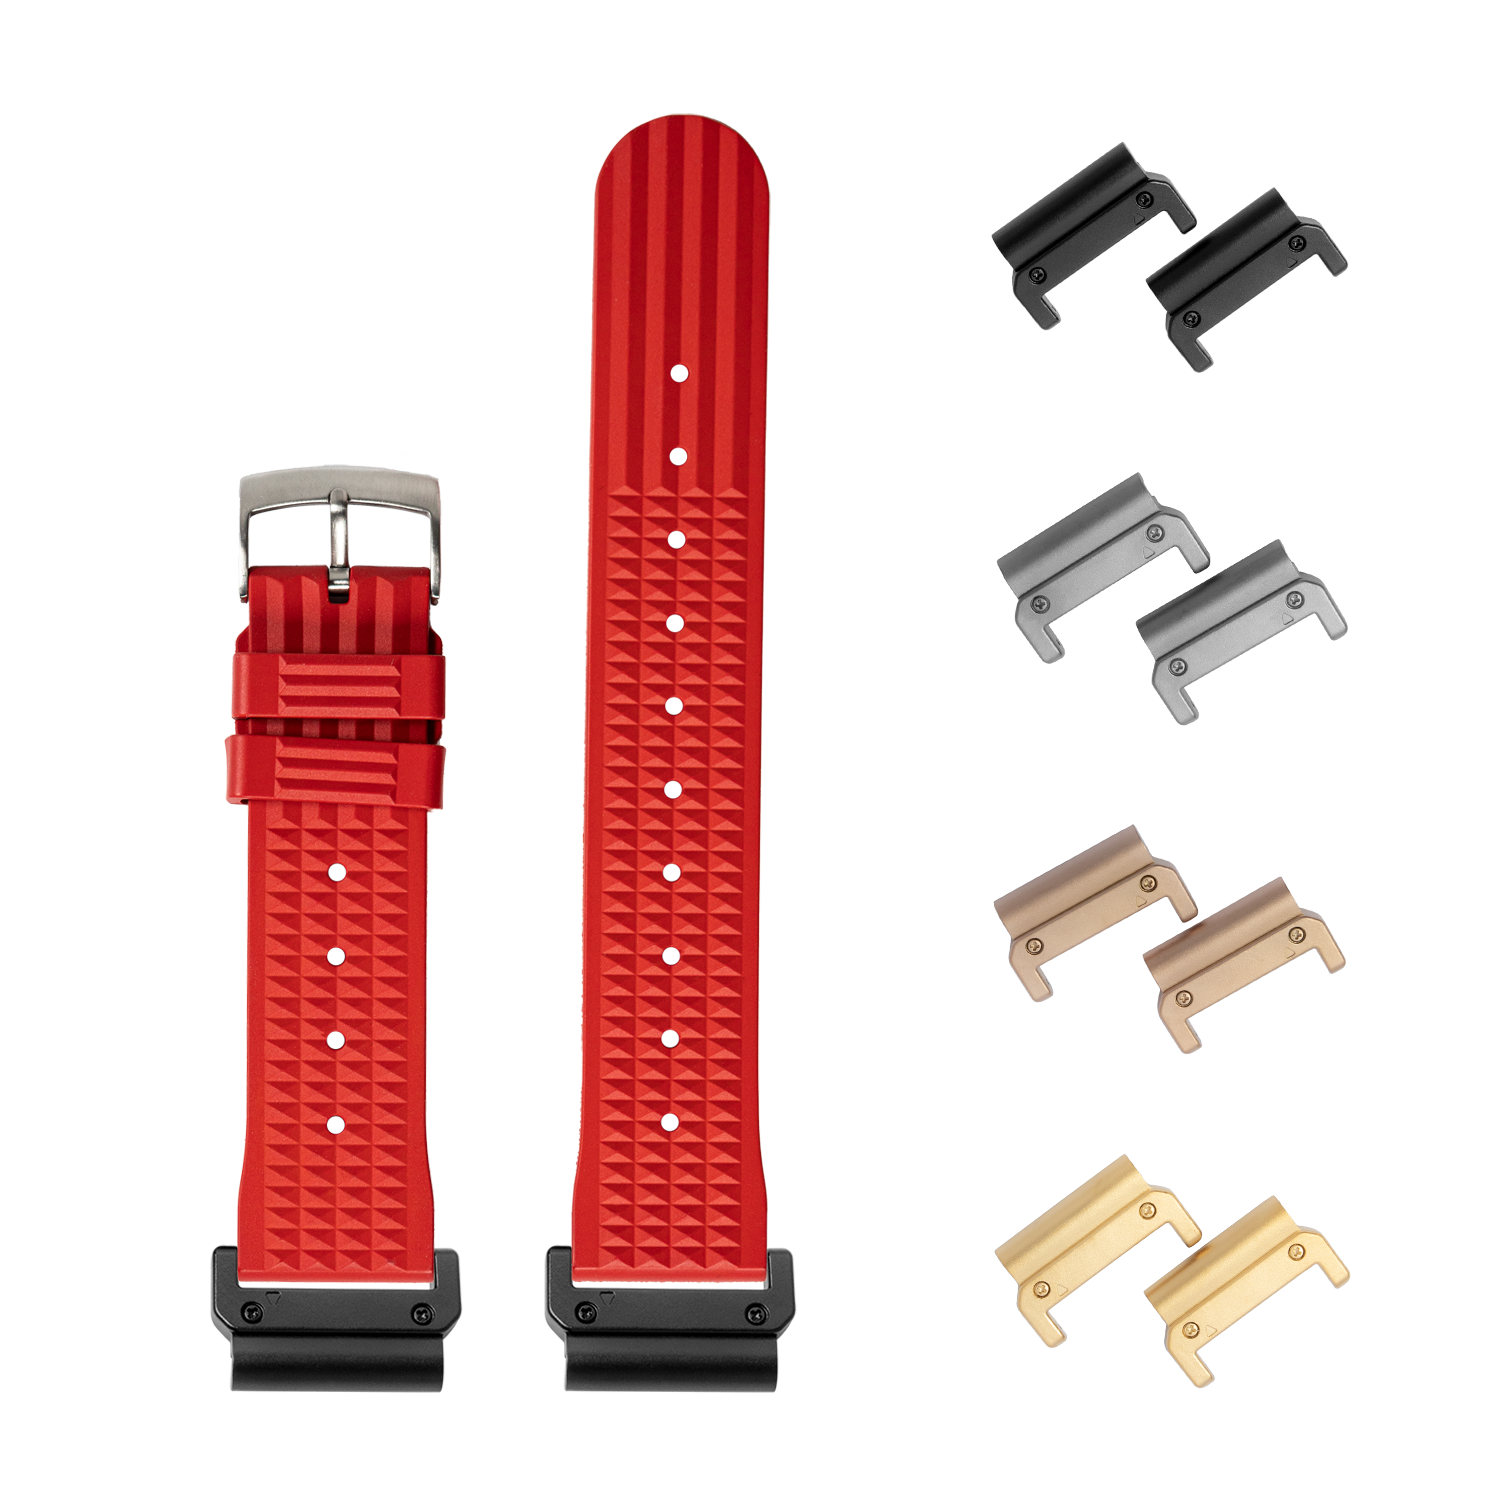 [QuickFit] King Waffle FKM Rubber - Red 22mm